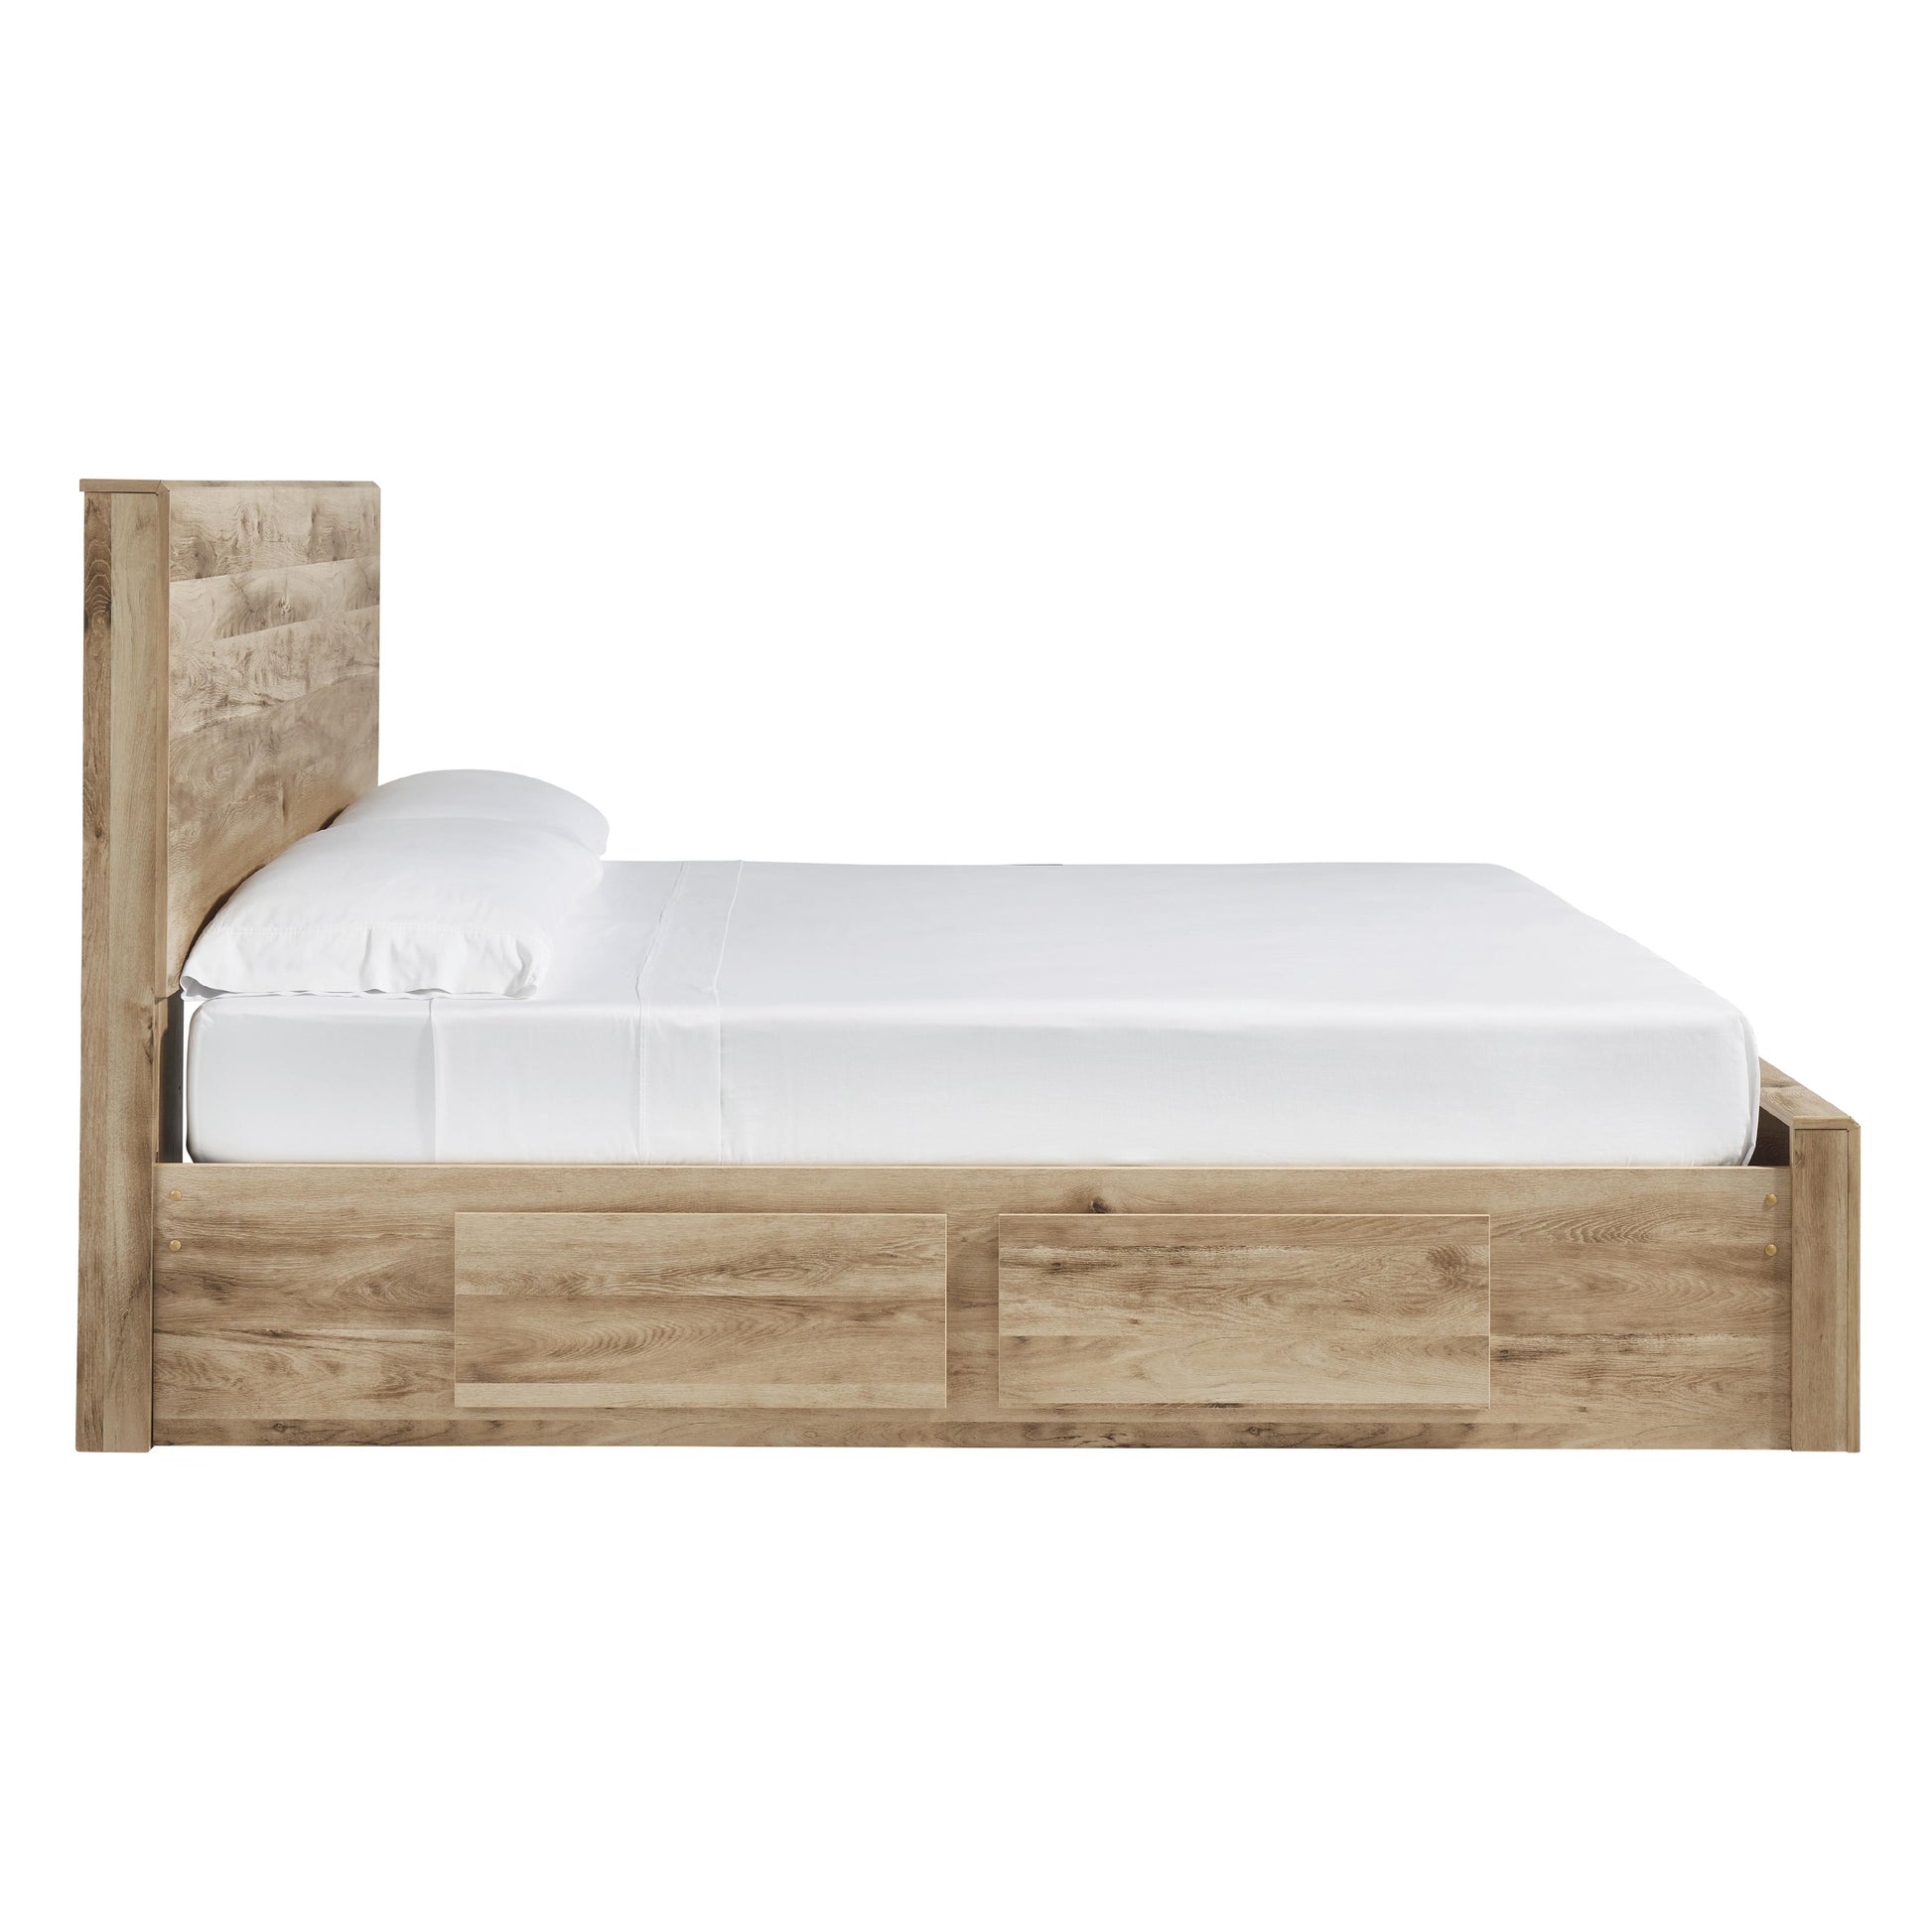 Signature Design by Ashley Hyanna Queen Panel Bed with Storage B1050-57/B1050-54S/B1050-60/B1050-95/B100-13 IMAGE 3